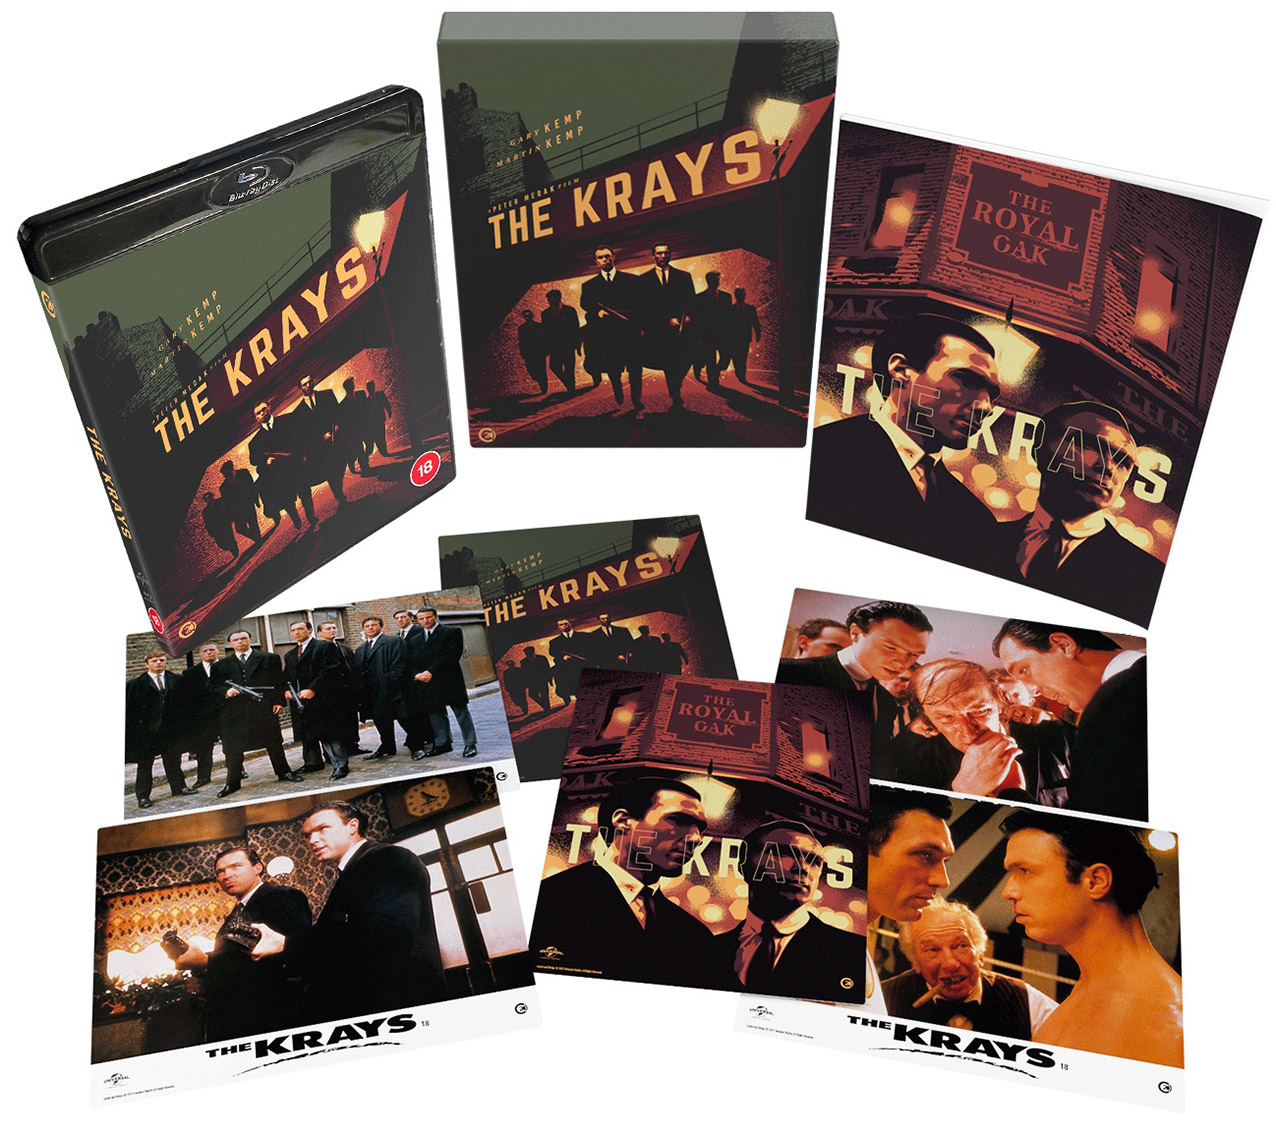 The Krays Limited Edition Blu-ray pack shot